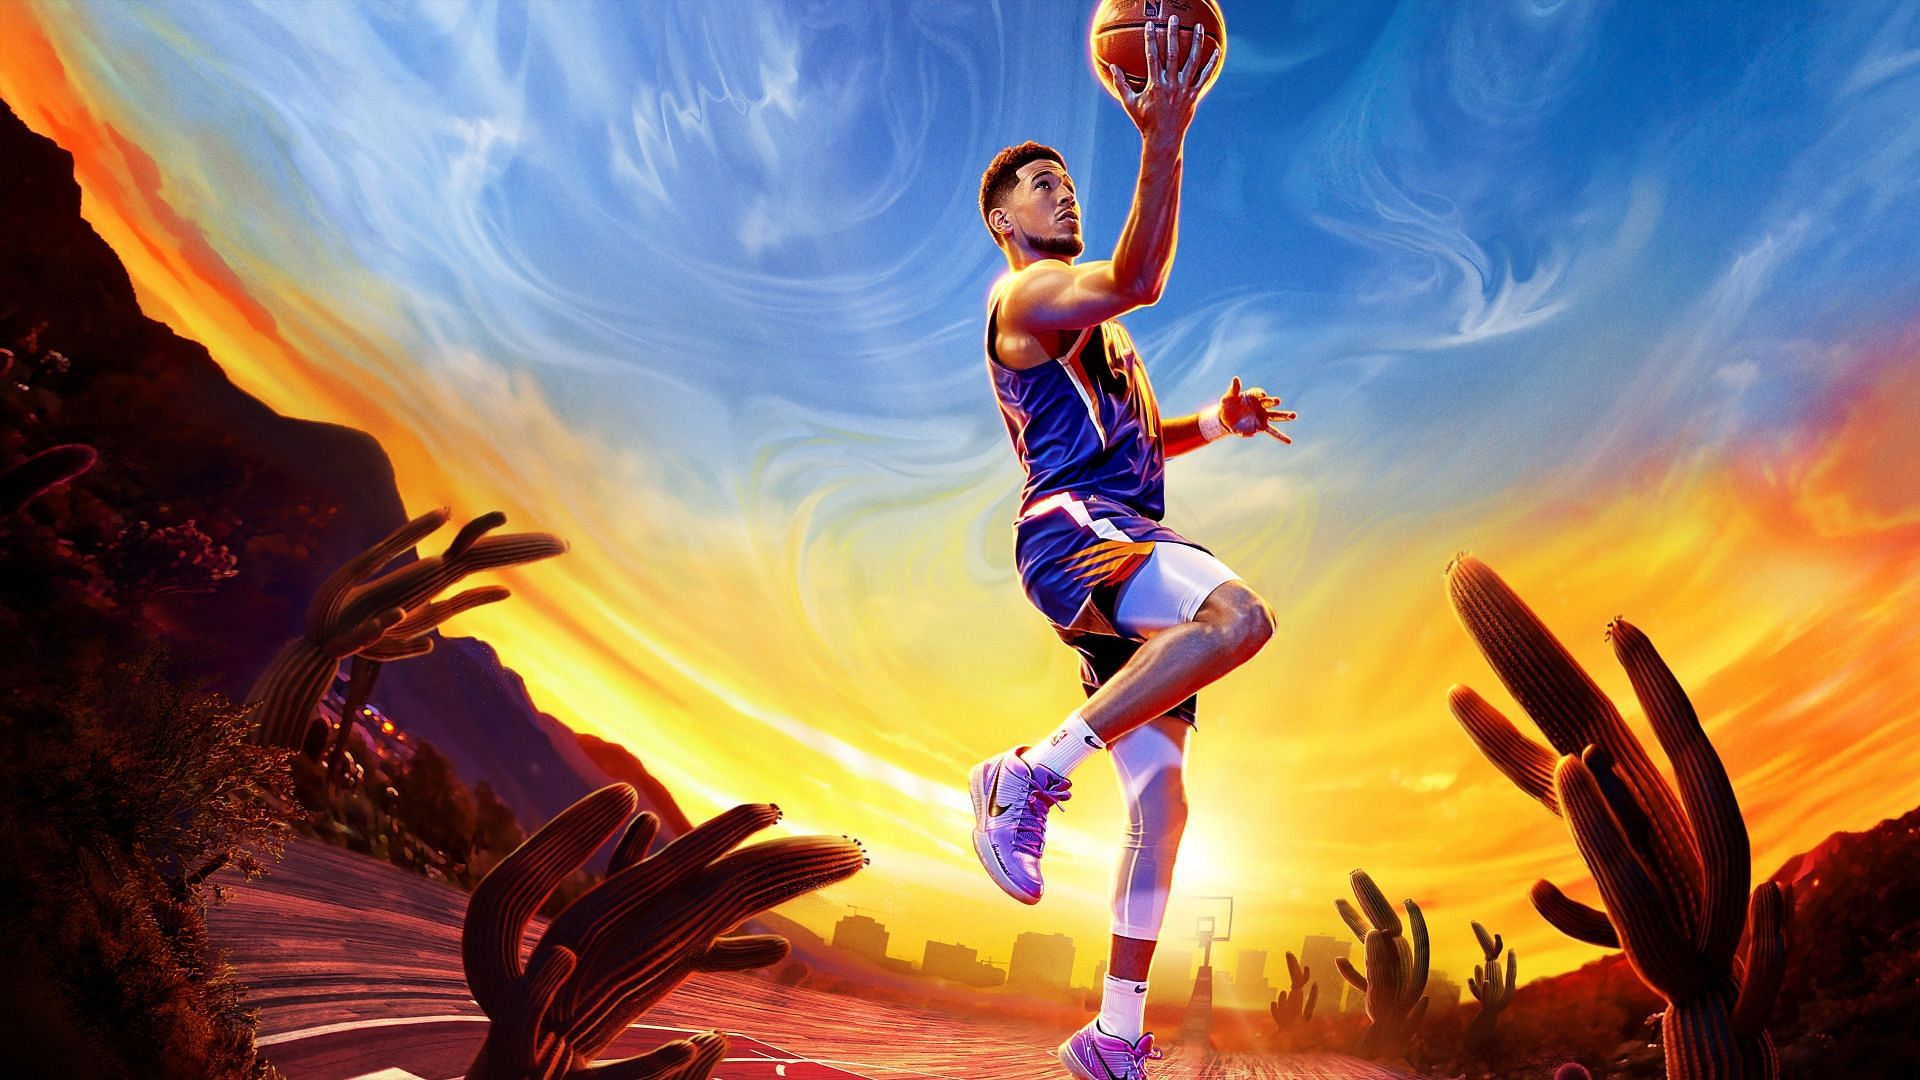 Devin Booker of the Phoenix Suns on the cover of NBA 2K23: Digital Deluxe edition.